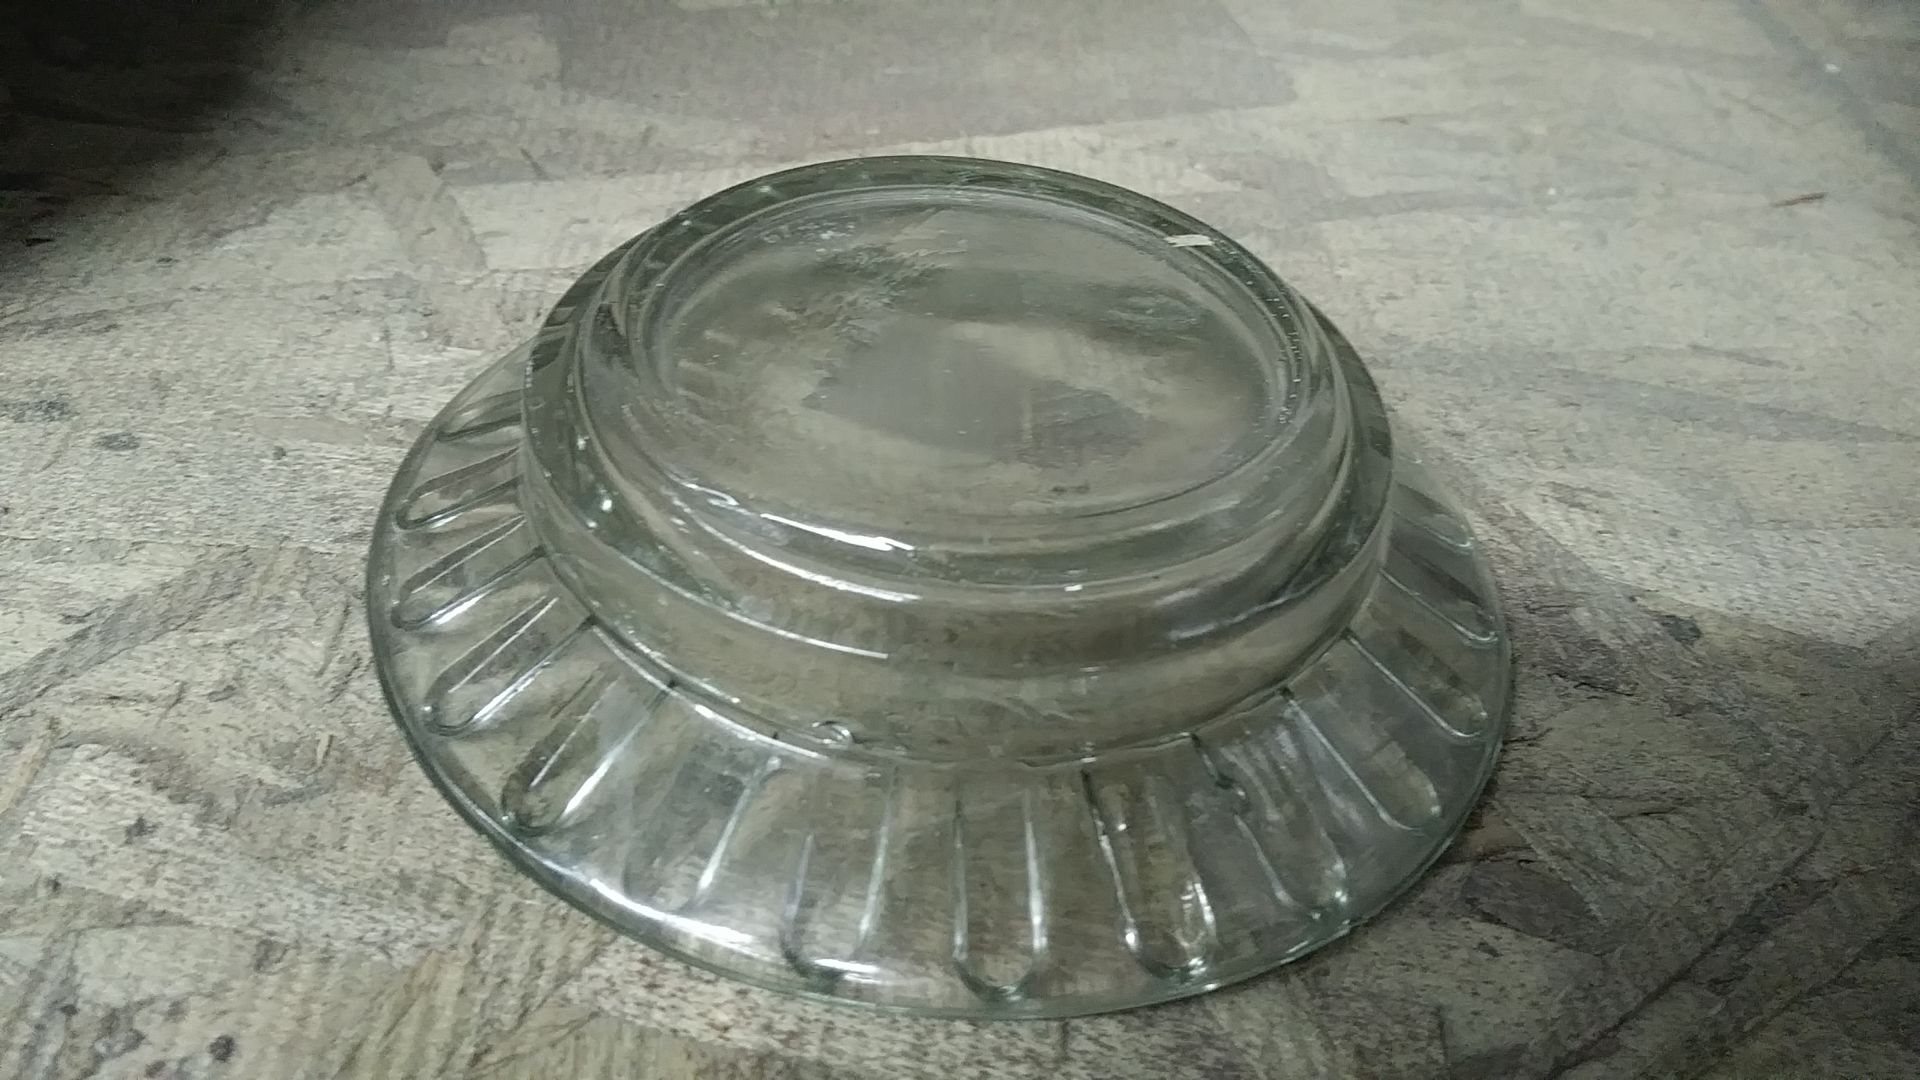 ASSORTED 4" DIA ROUND GLASS ASHTRAYS (includes QTY 39 in this lot) - Image 3 of 4